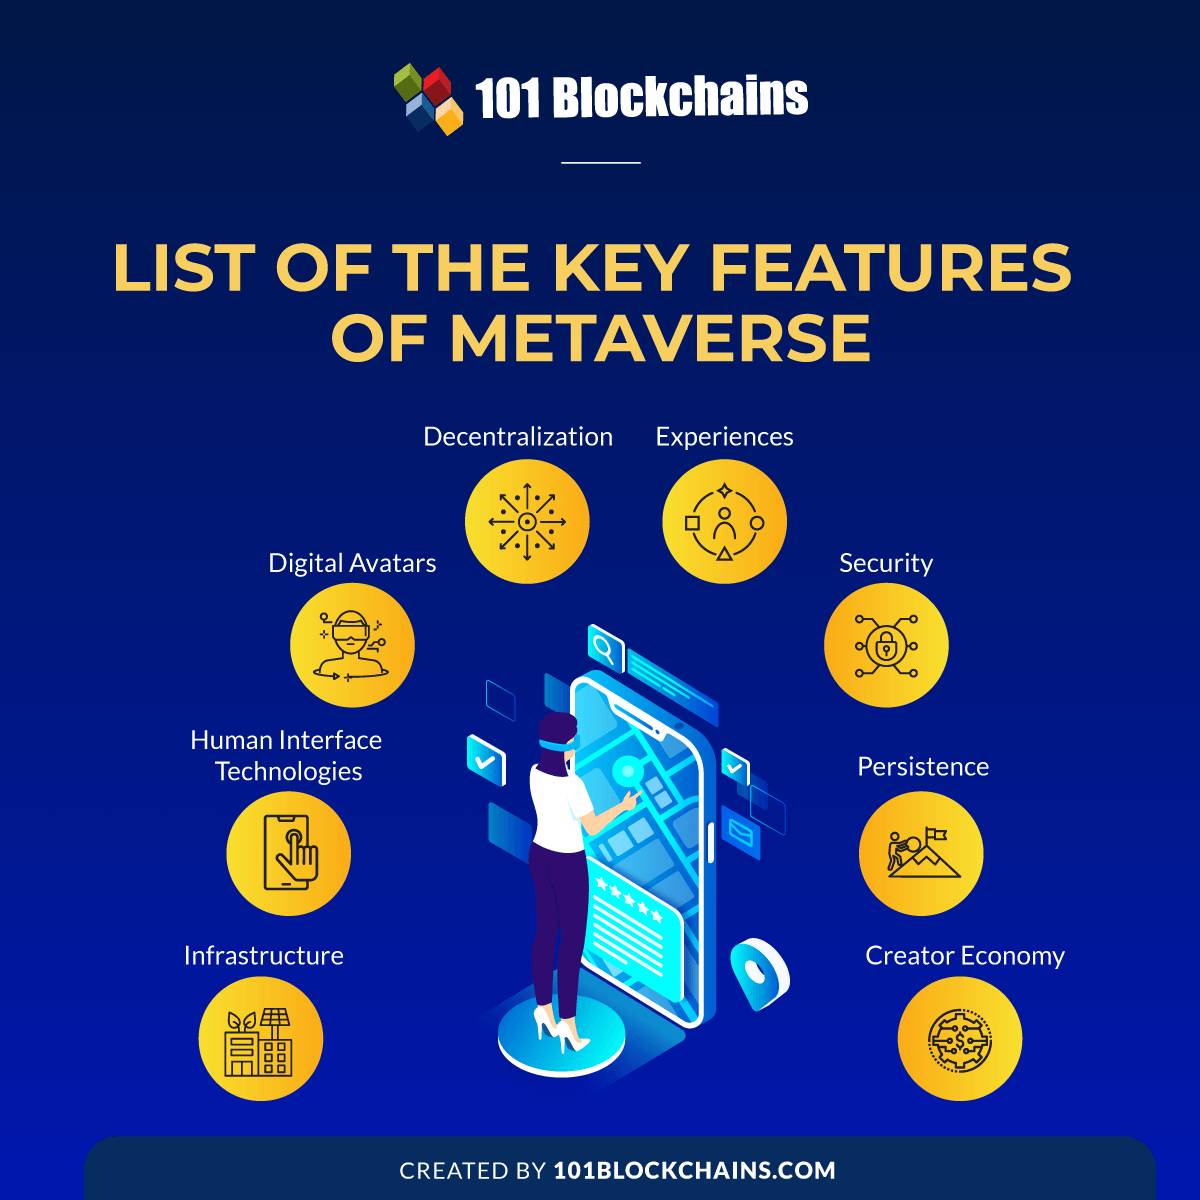 List of the Key Features of Metaverse